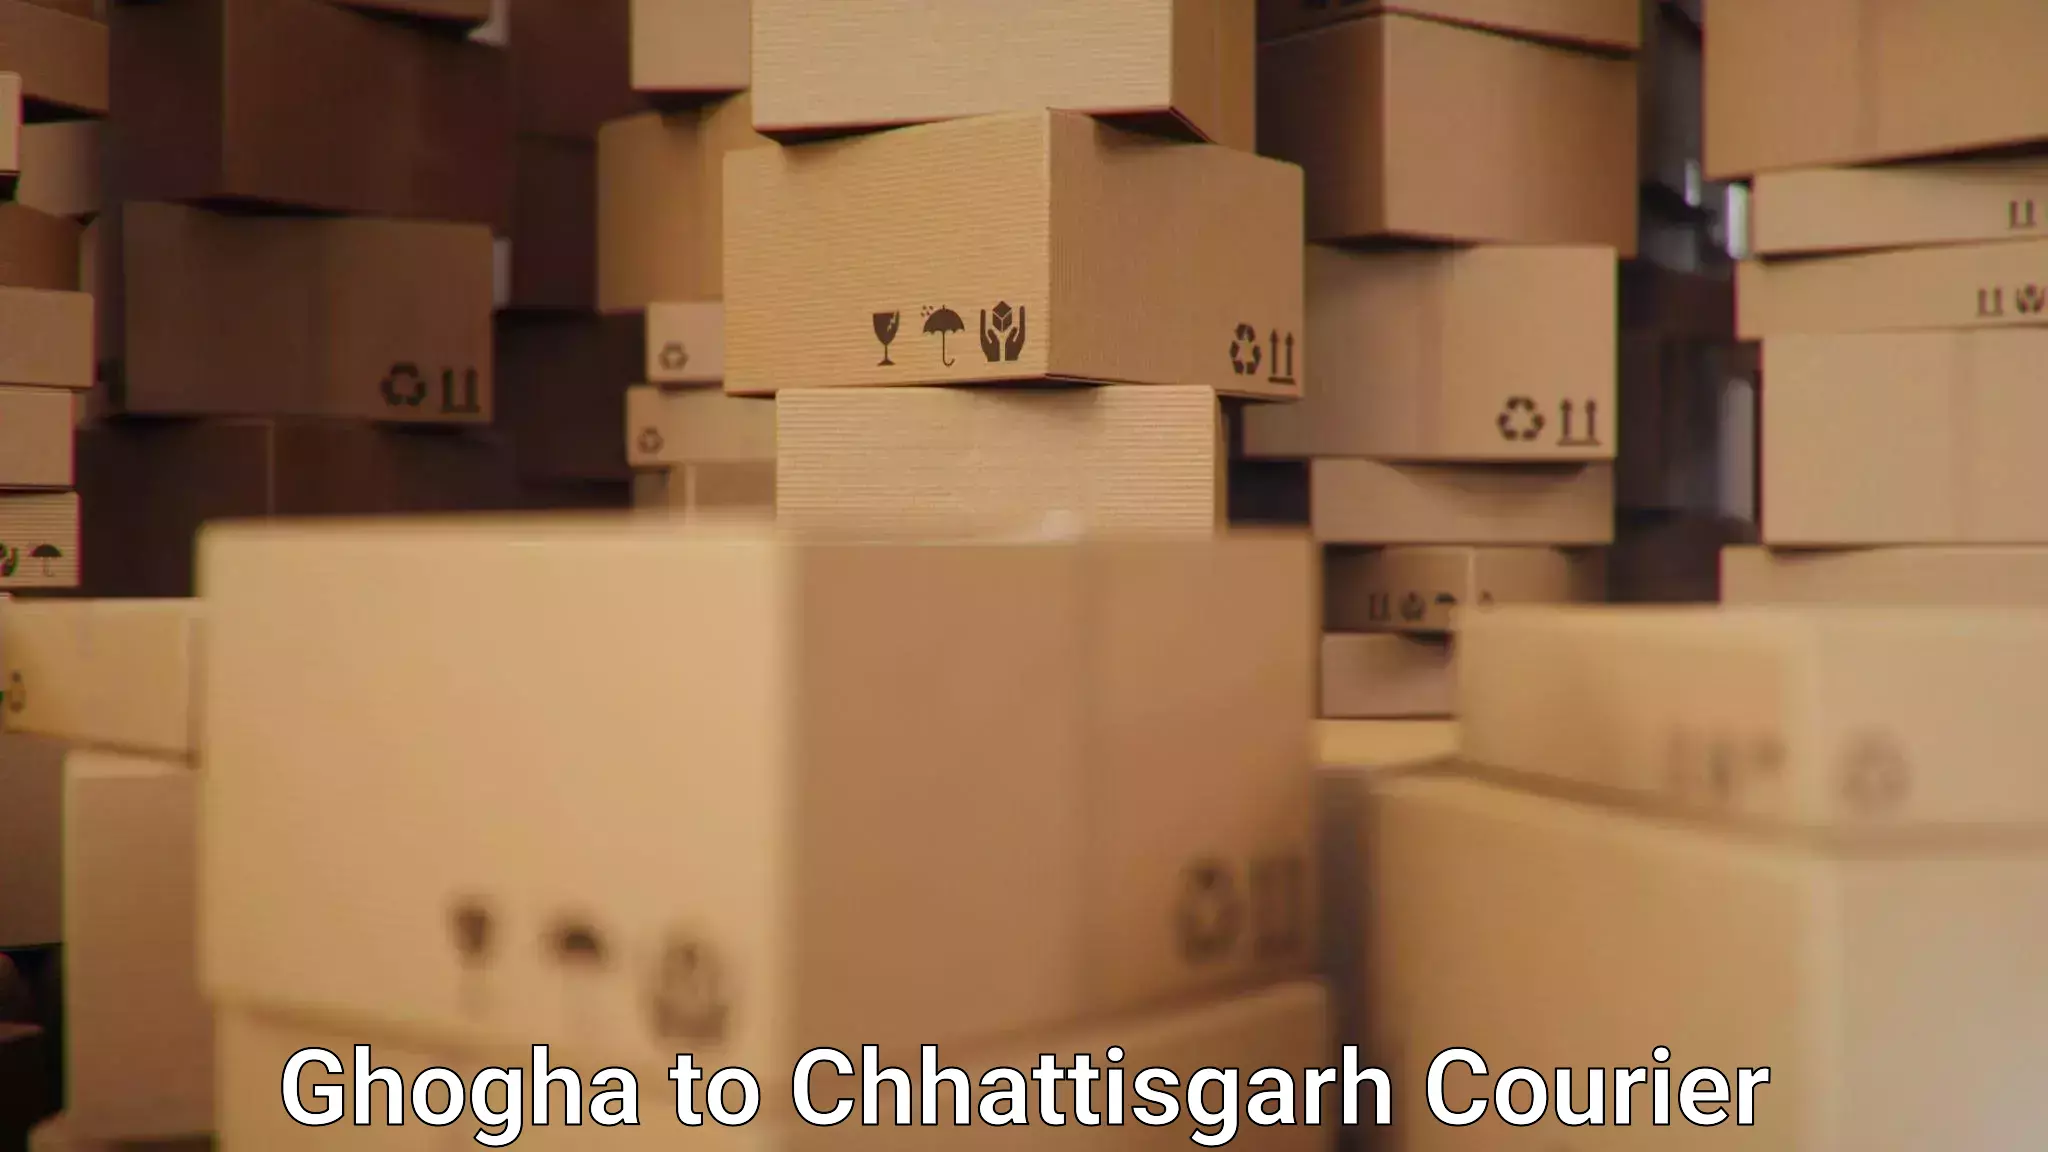 Ocean freight courier Ghogha to Basna